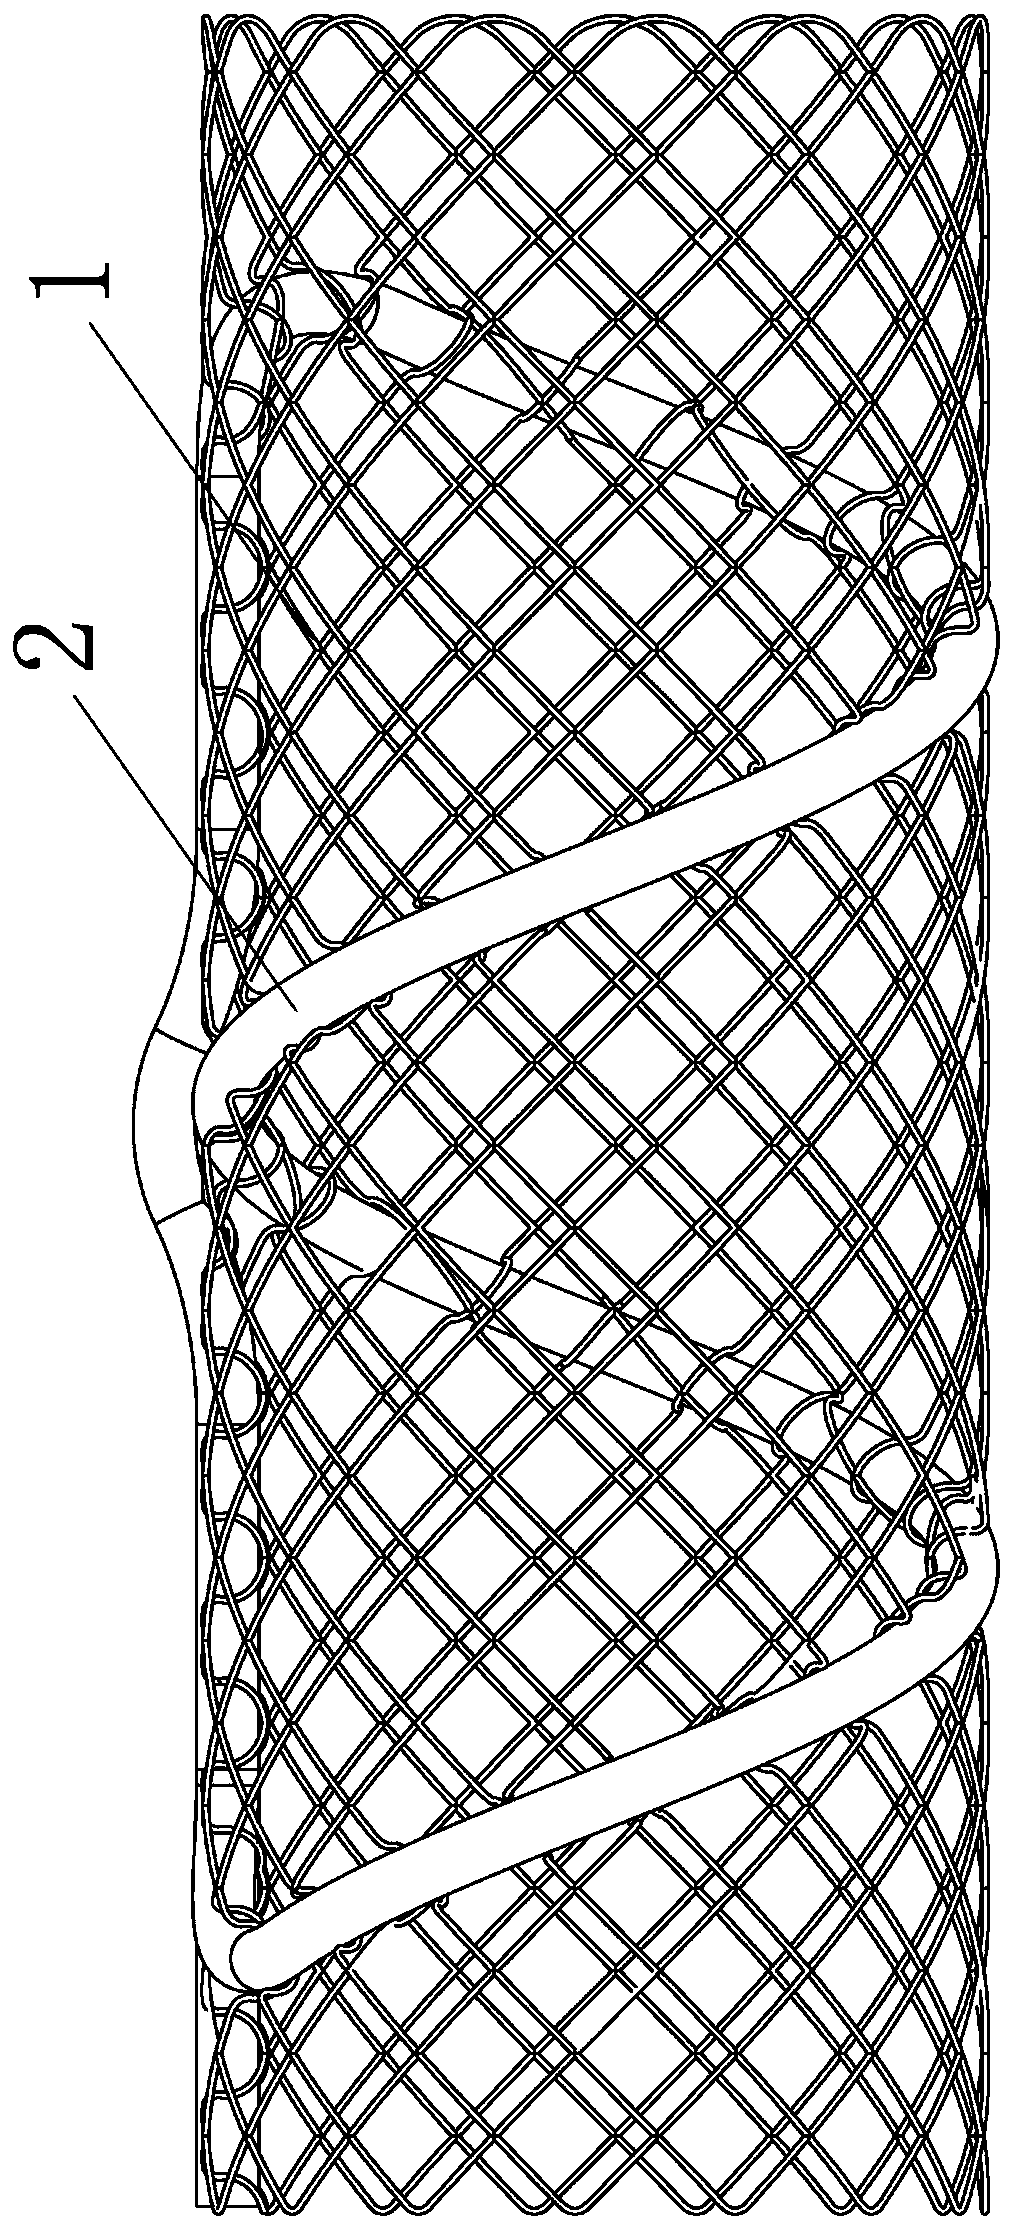 Spiral close-range radionuclide radiotherapy device and particle automatic loading assembly